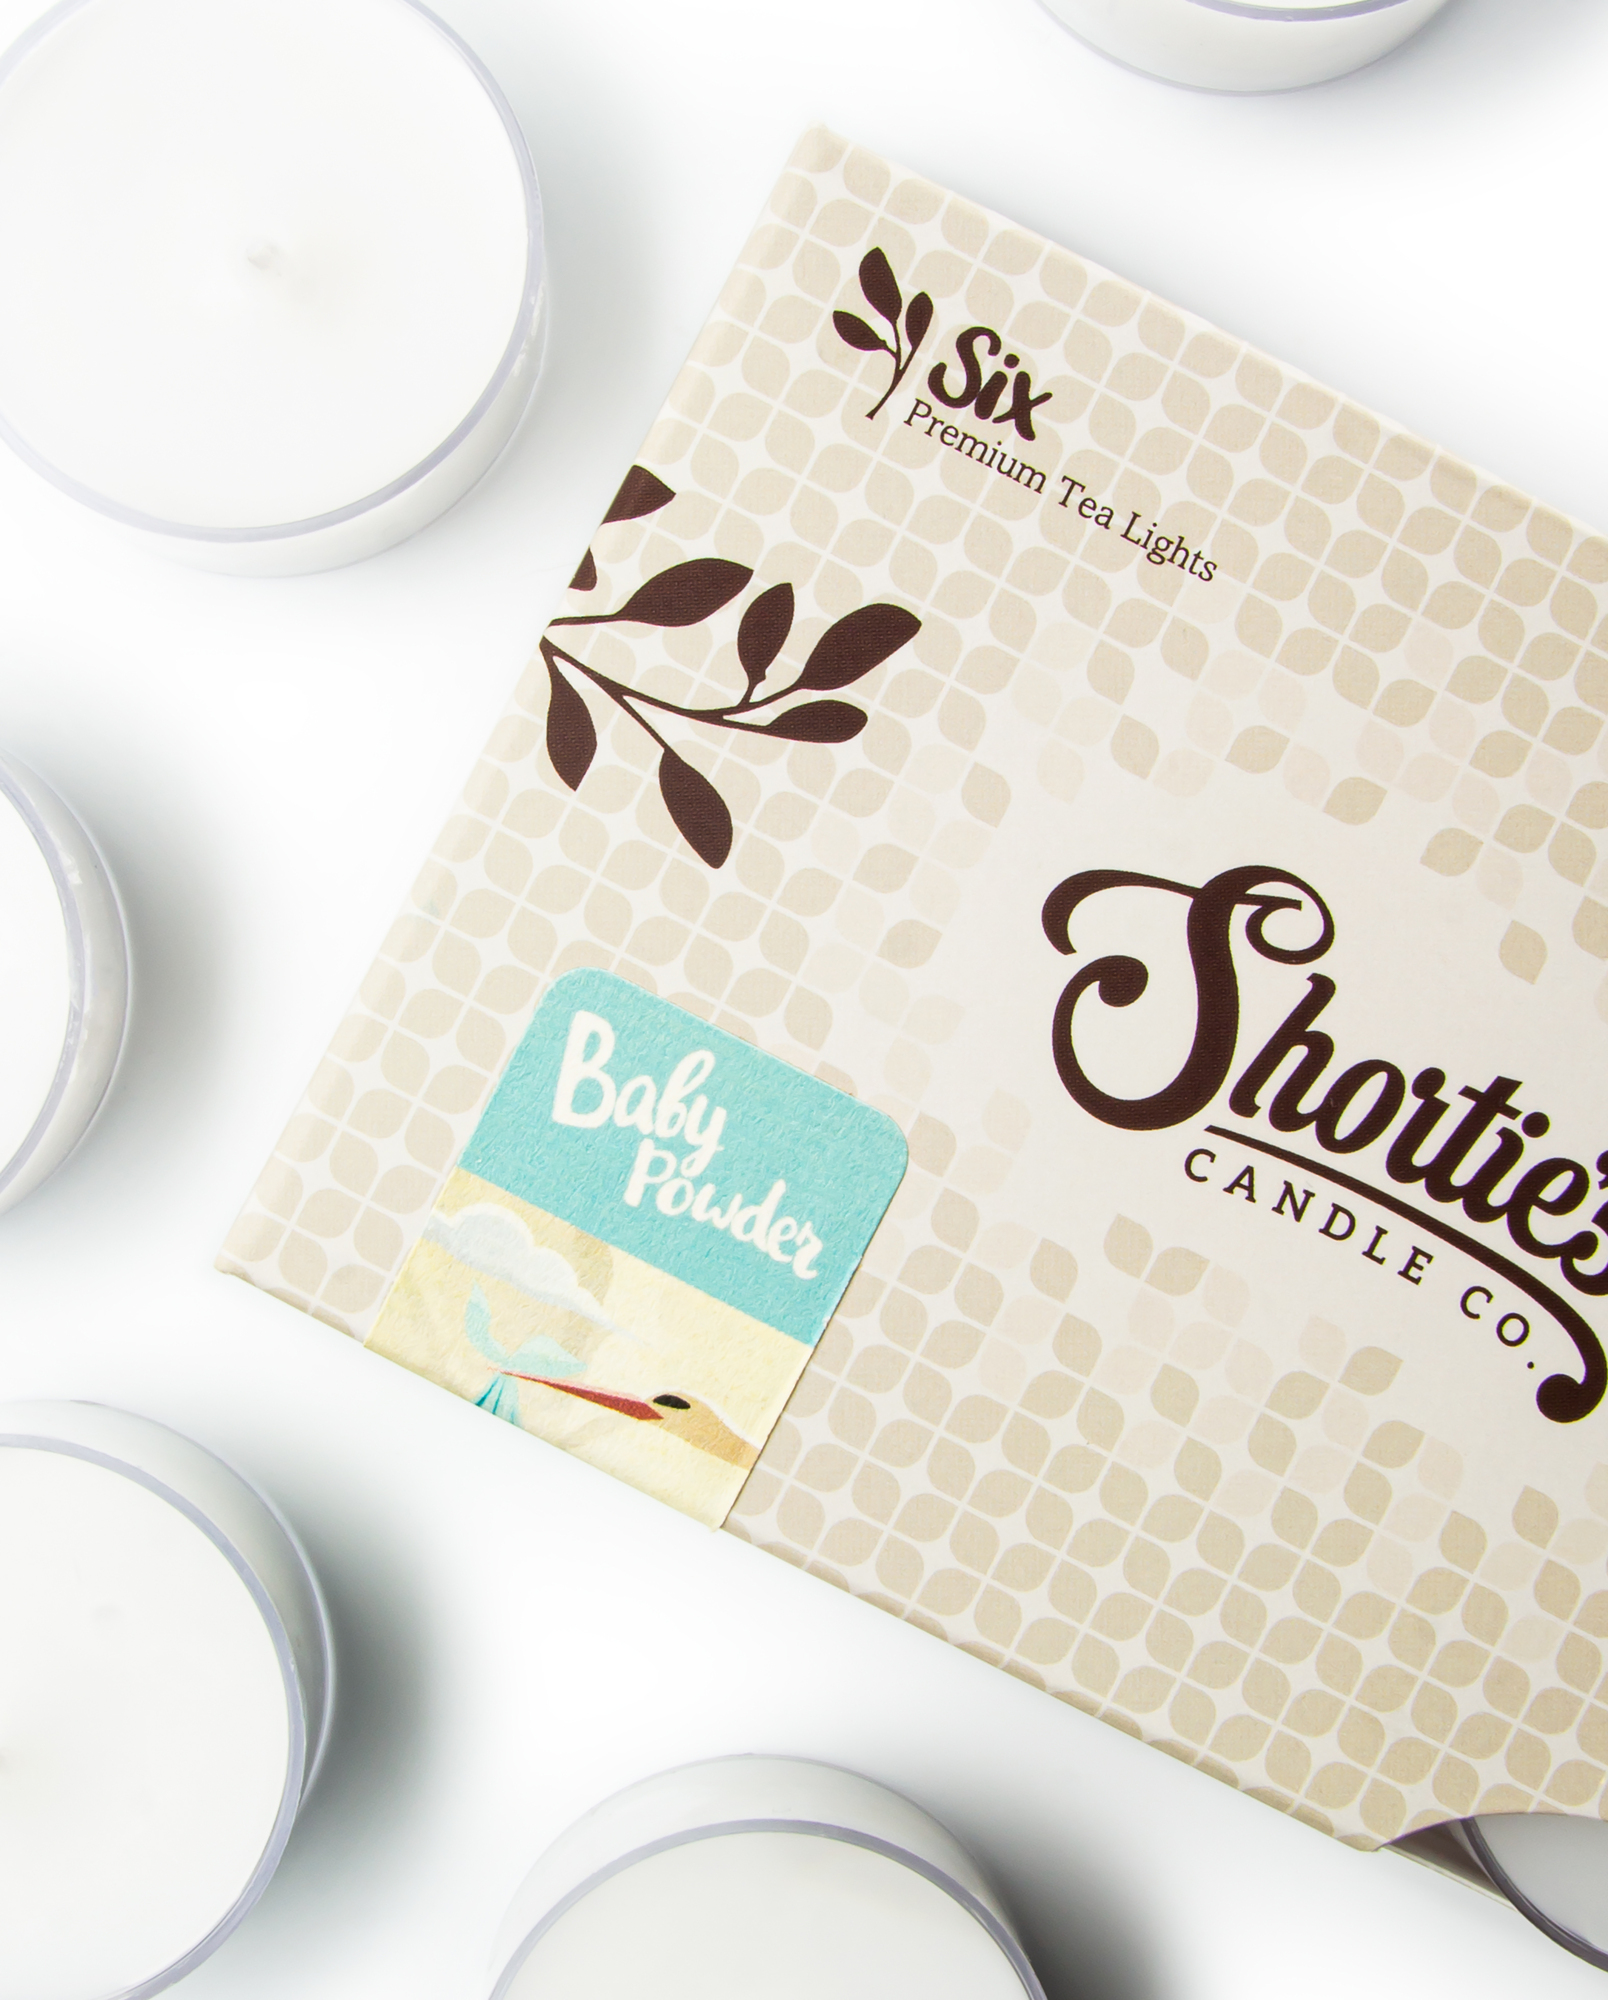 Baby Powder Tealight Candles Multi Pack - 12 White Premium Scented Tea  Lights - Natural Oils - Shortie's Candle Company 